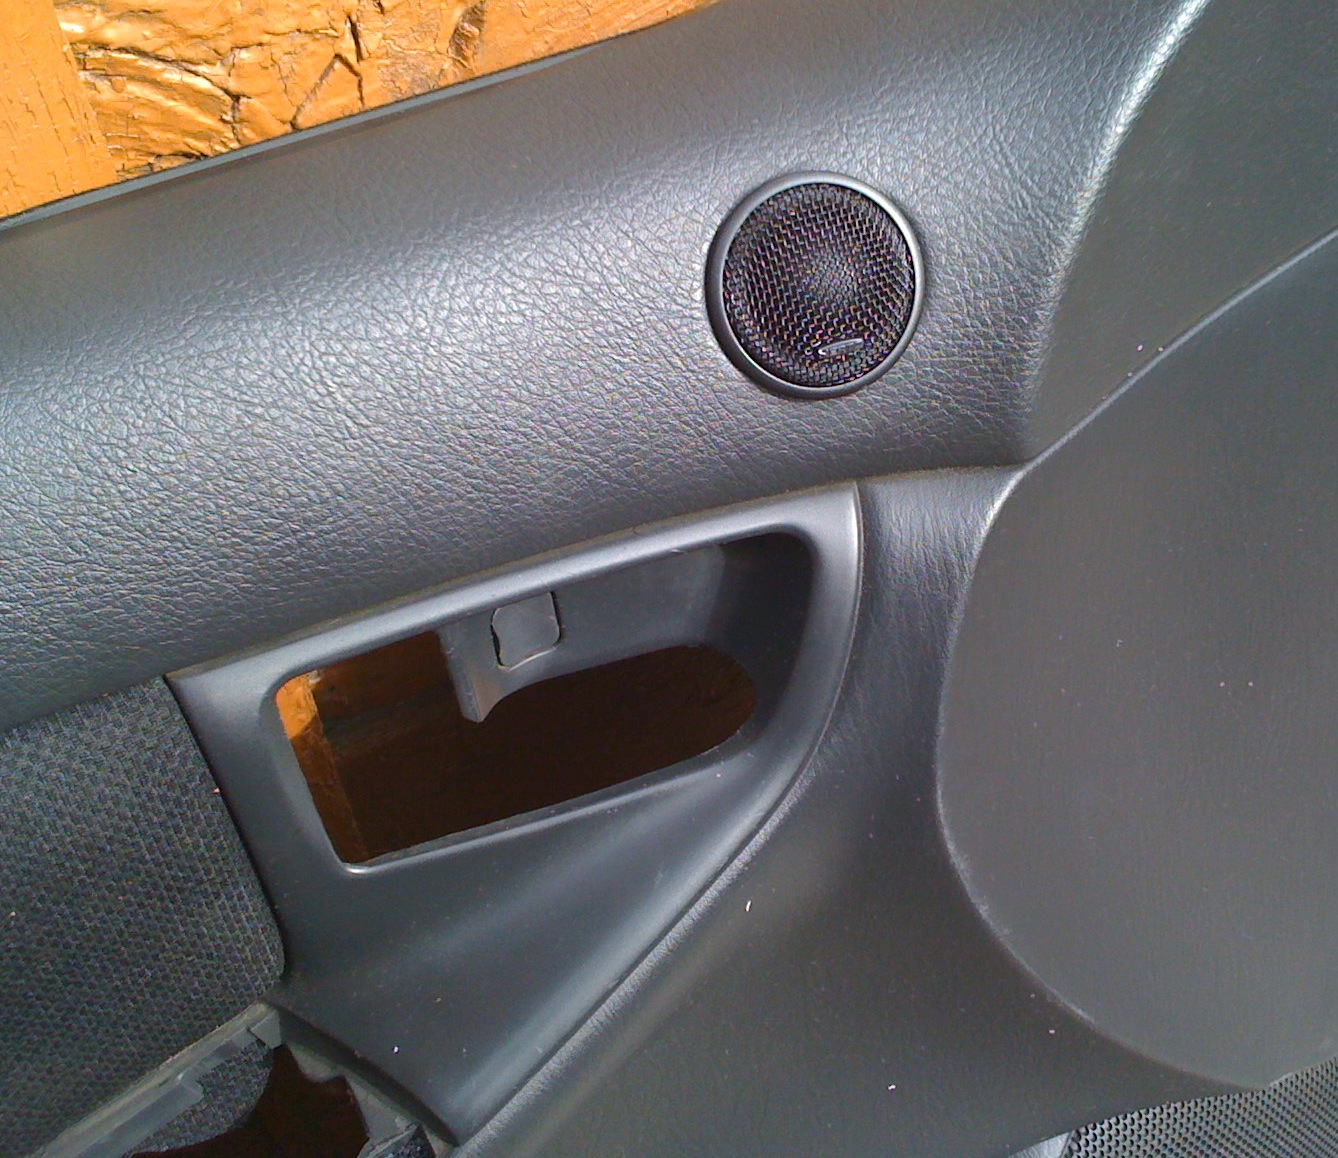 This is how I made music and soundproofing - Toyota Corolla Runx 15 L 2001